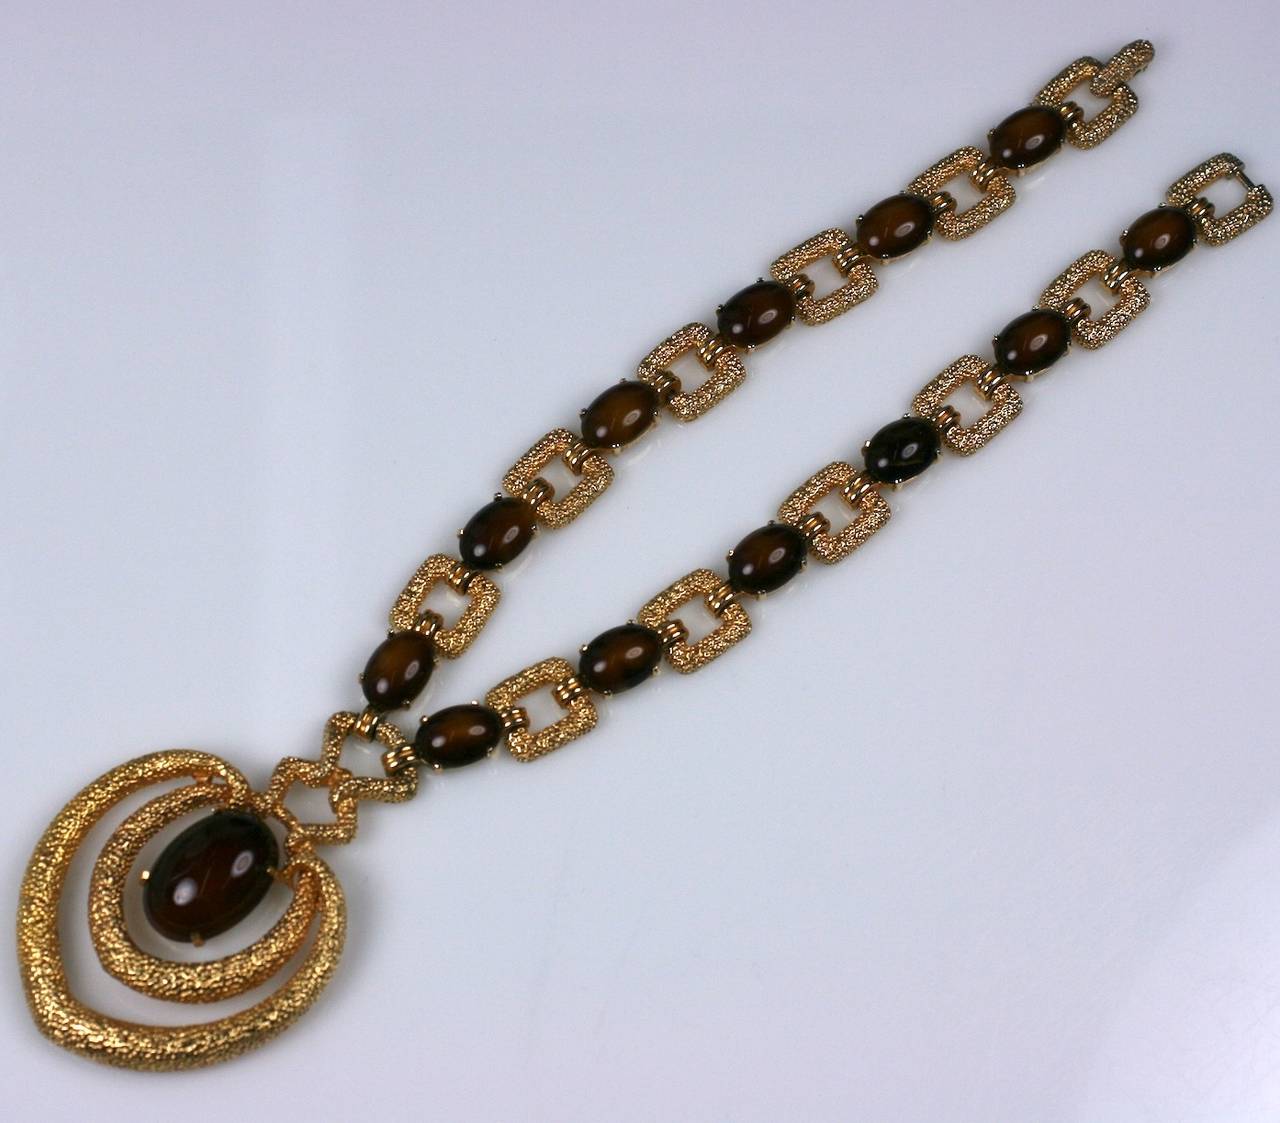 Attractive Webb Style Pendant by Joseph Mazer, NY. Textured gilt metal links are spaced with faux tiger eye cabochons which end in a large hooped, articulated pendant with central cab stone. Very Webb in feeling. 1970's USA.
Necklace 16